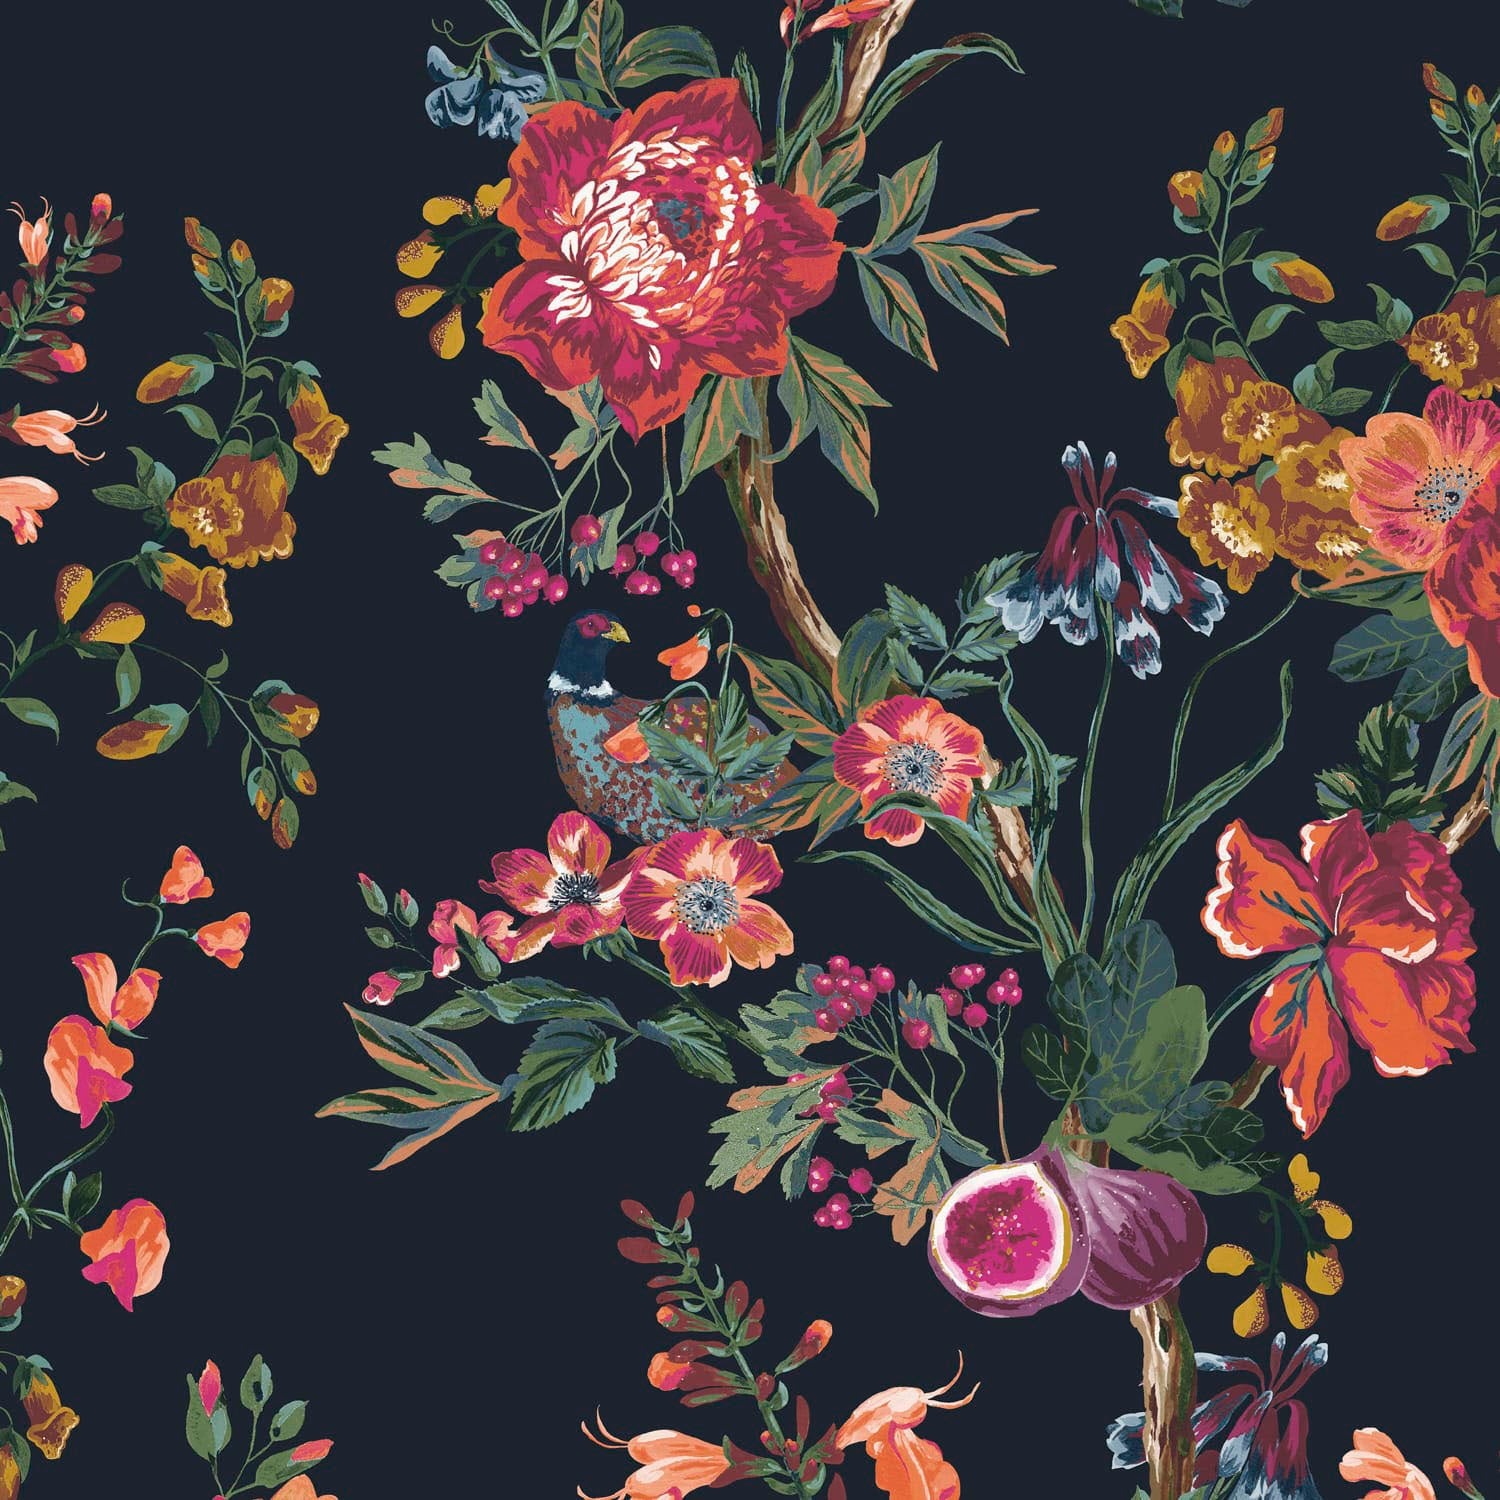 Vliestapete »Forest Chinoiserie«, floral, floral